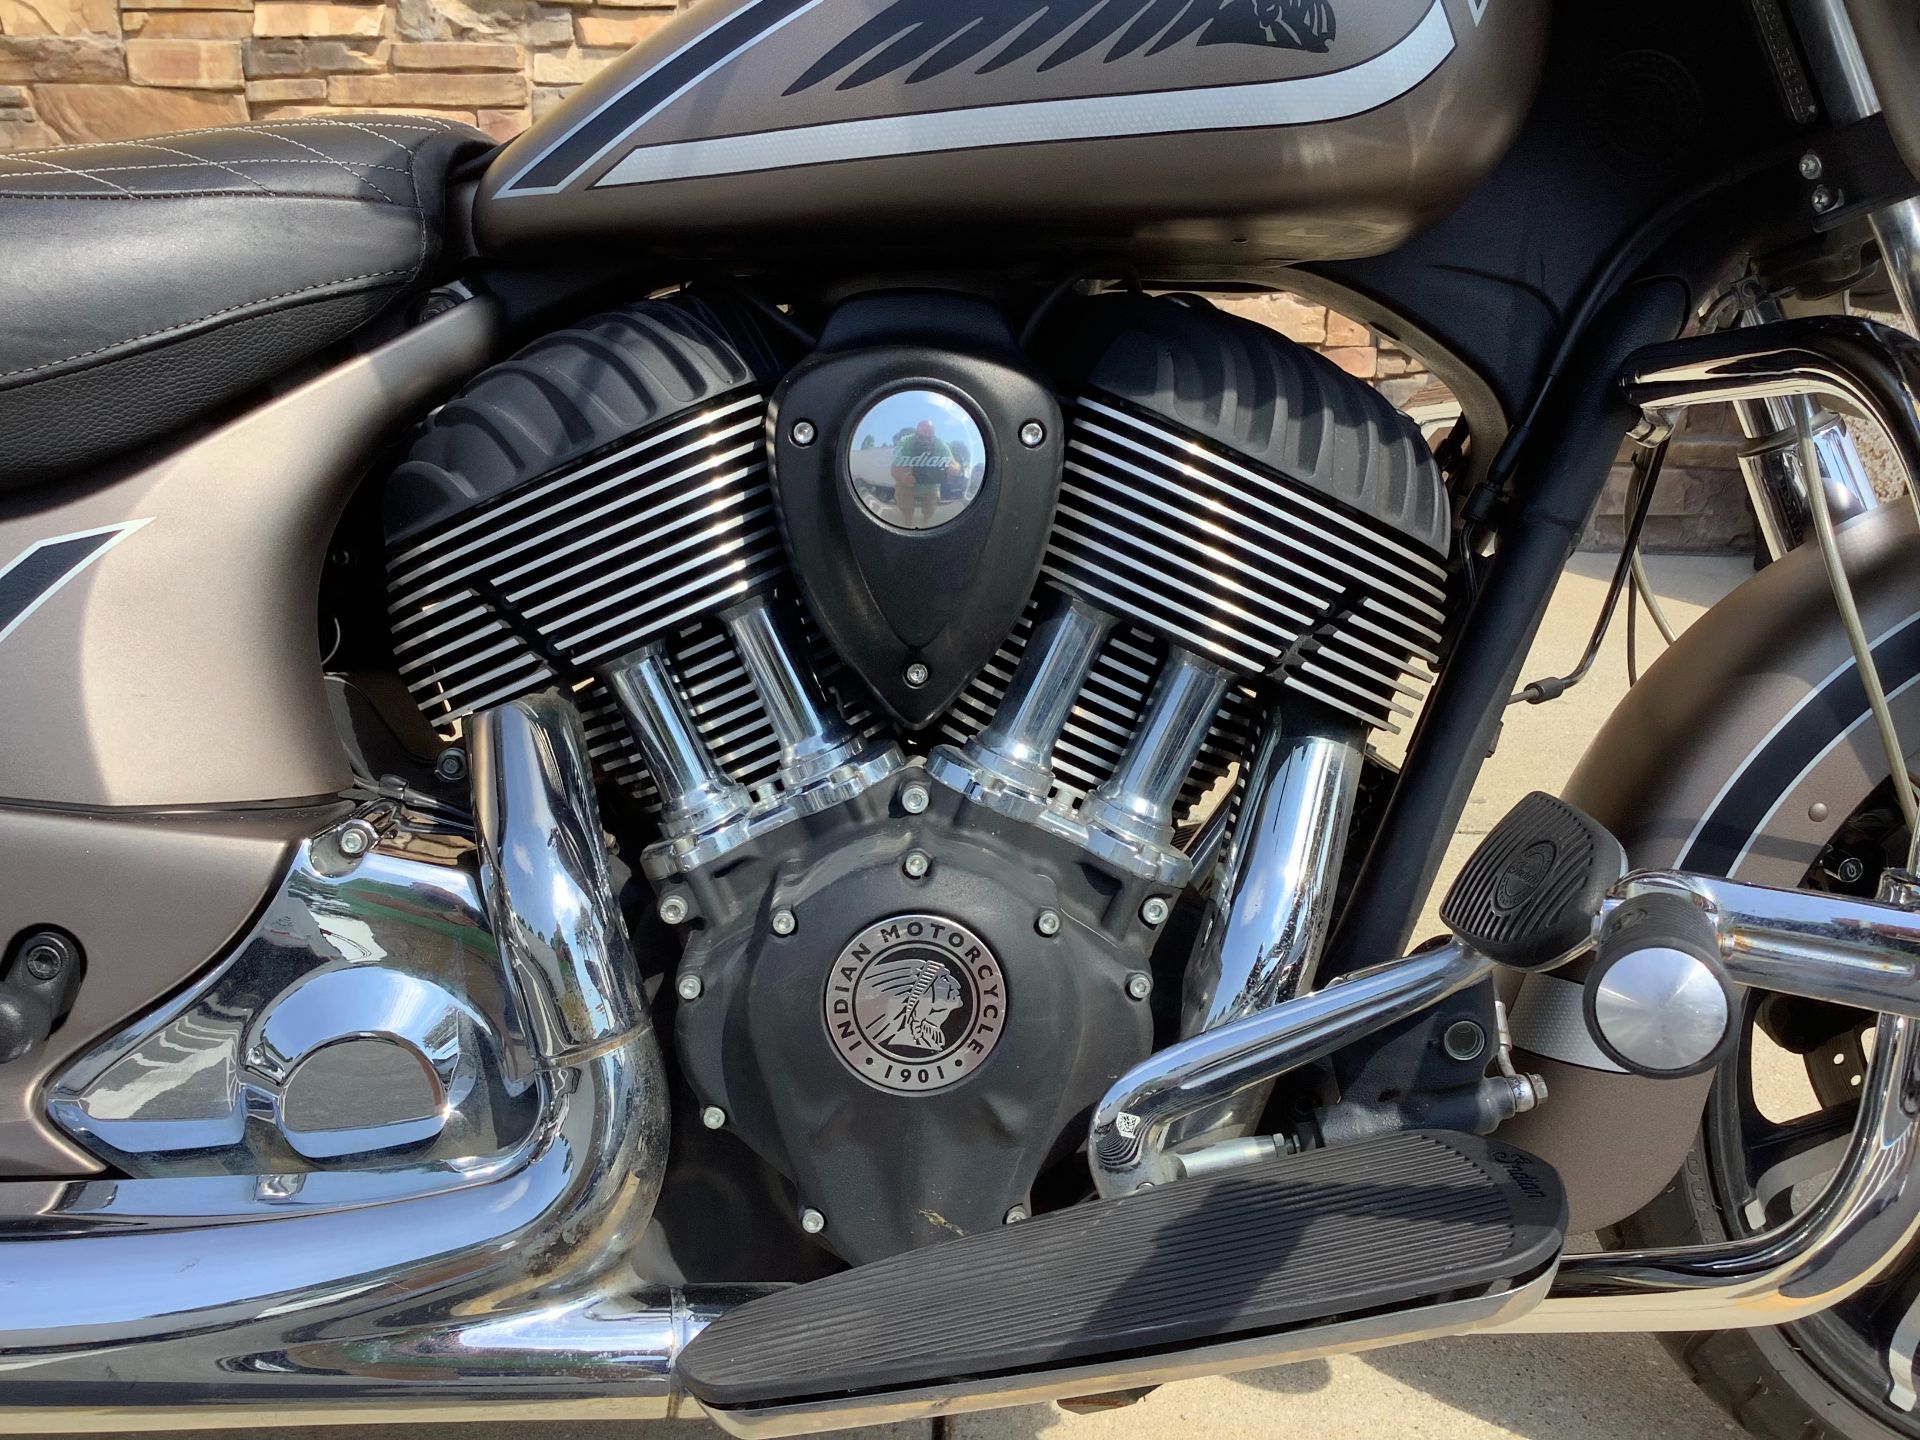 2018 Indian Motorcycle CHIEFTAIN LIMITED in Panama City Beach, Florida - Photo 8